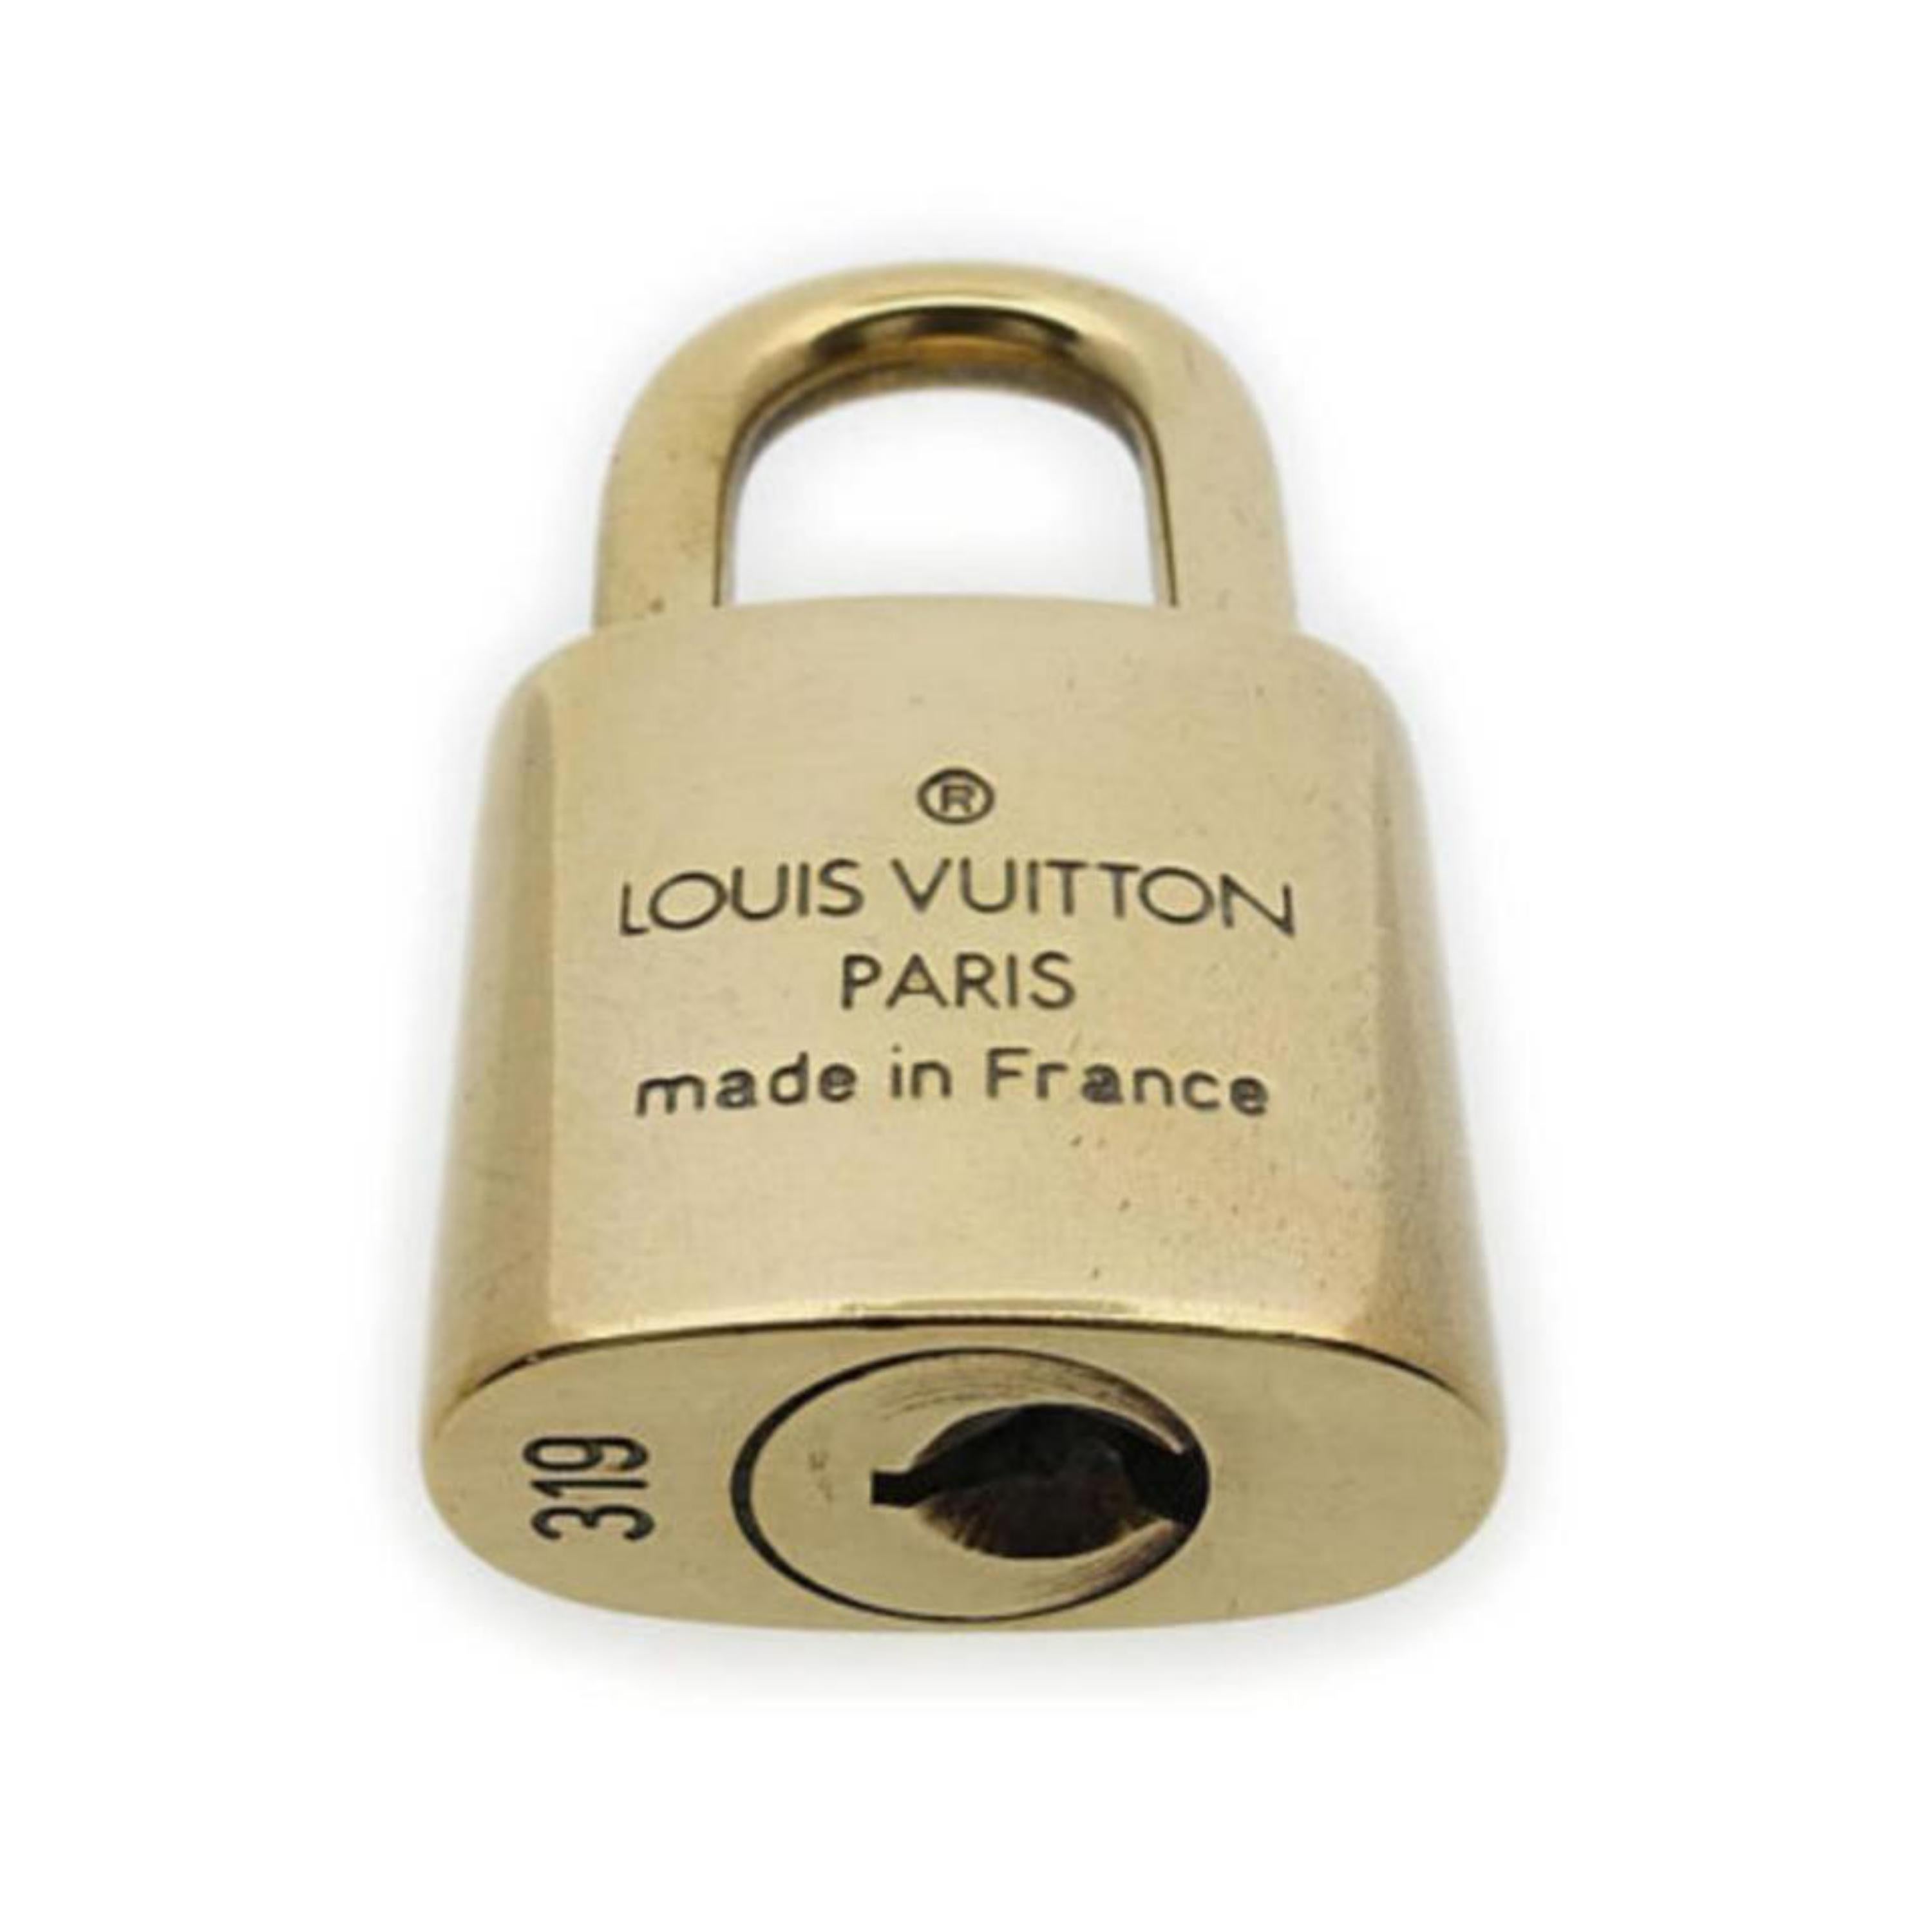 Louis Vuitton Gold Gold Single Key Lock Pad Lock and Key 867741 For Sale 1